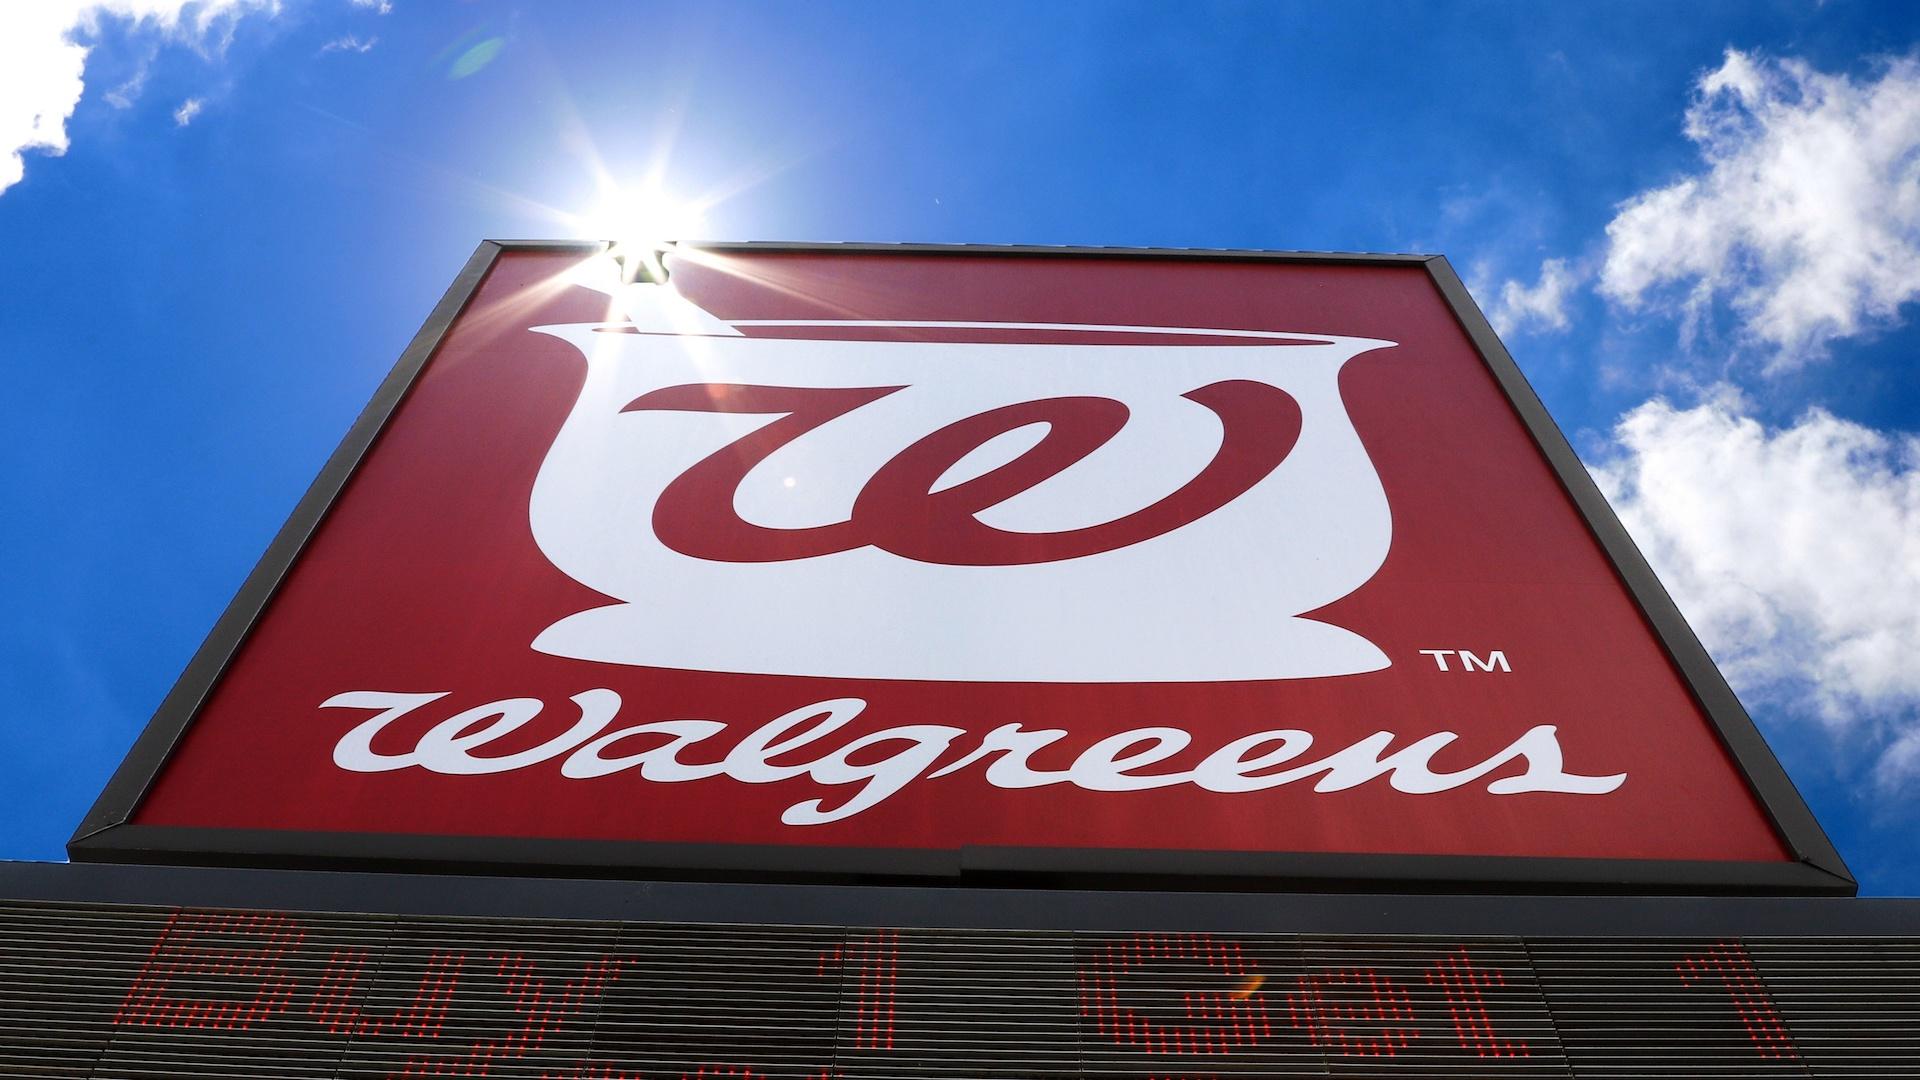 This June 25, 2019, file photo shows the sign outside a Walgreens Pharmacy in Pittsburgh. Walgreens Boots Alliance will sell its pharmaceutical wholesaler business to AmerisourceBergen in $6.5 billion cash and stock deal. (AP Photo/Gene J. Puskar, File)